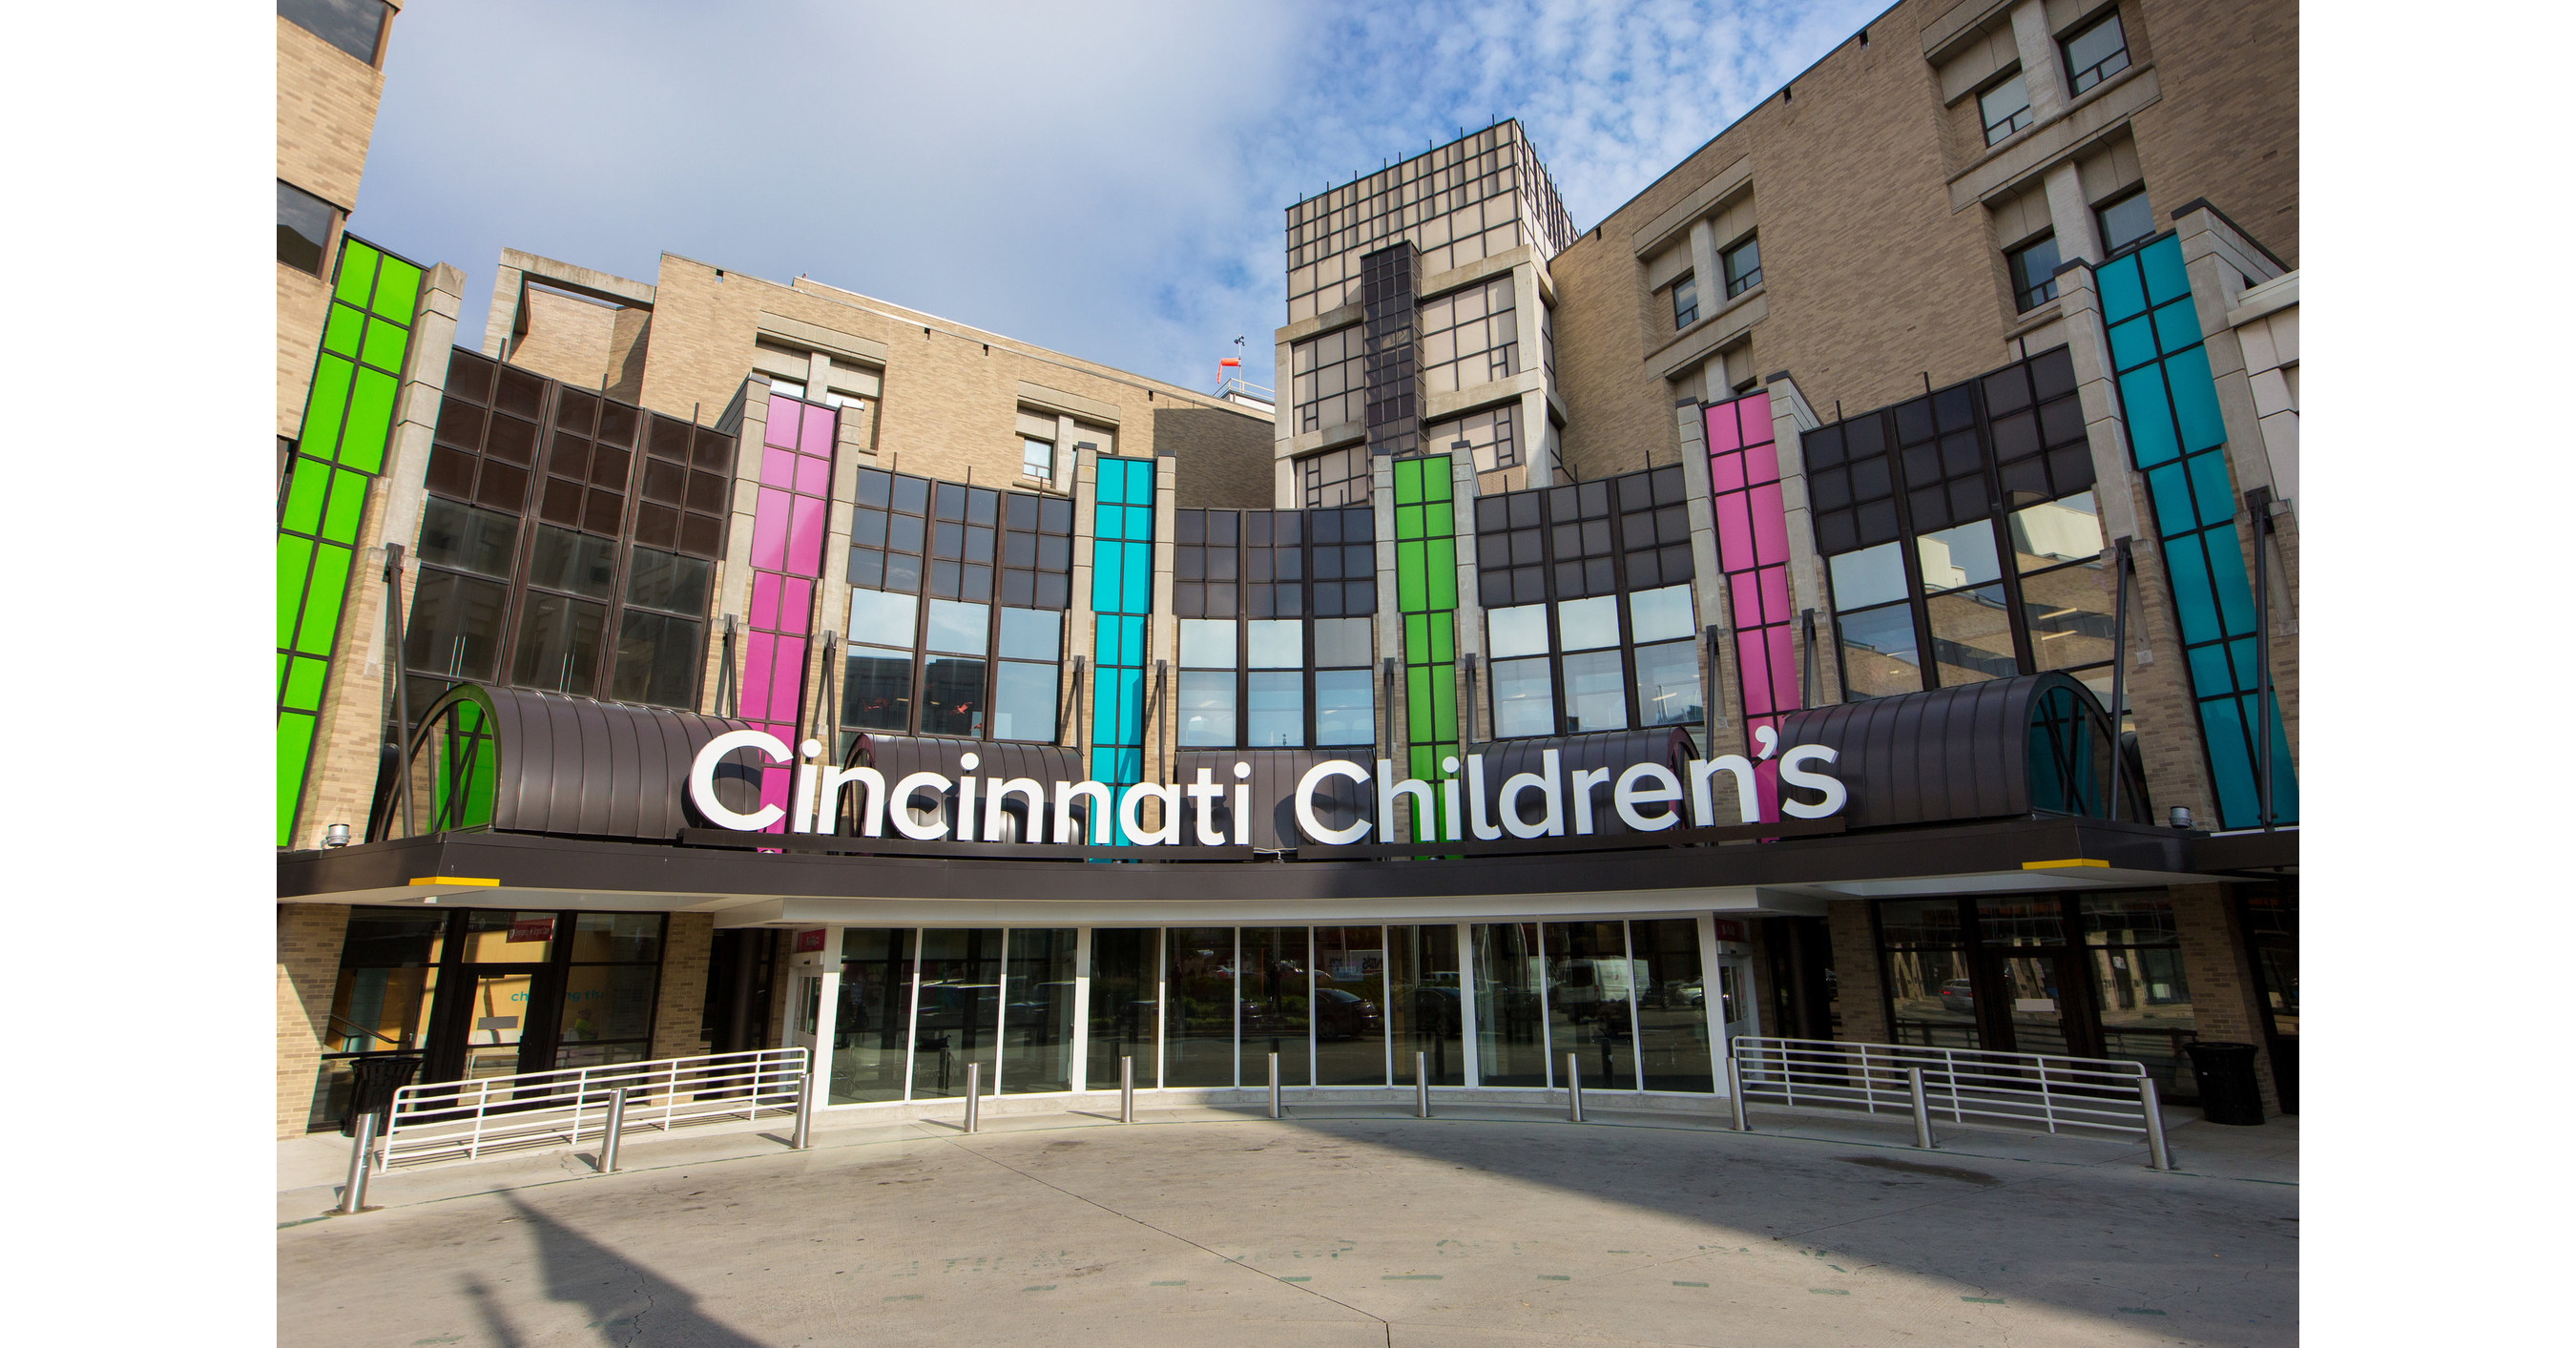 Cincinnati Children's Among the Best For 11th Year in a Row In U.S